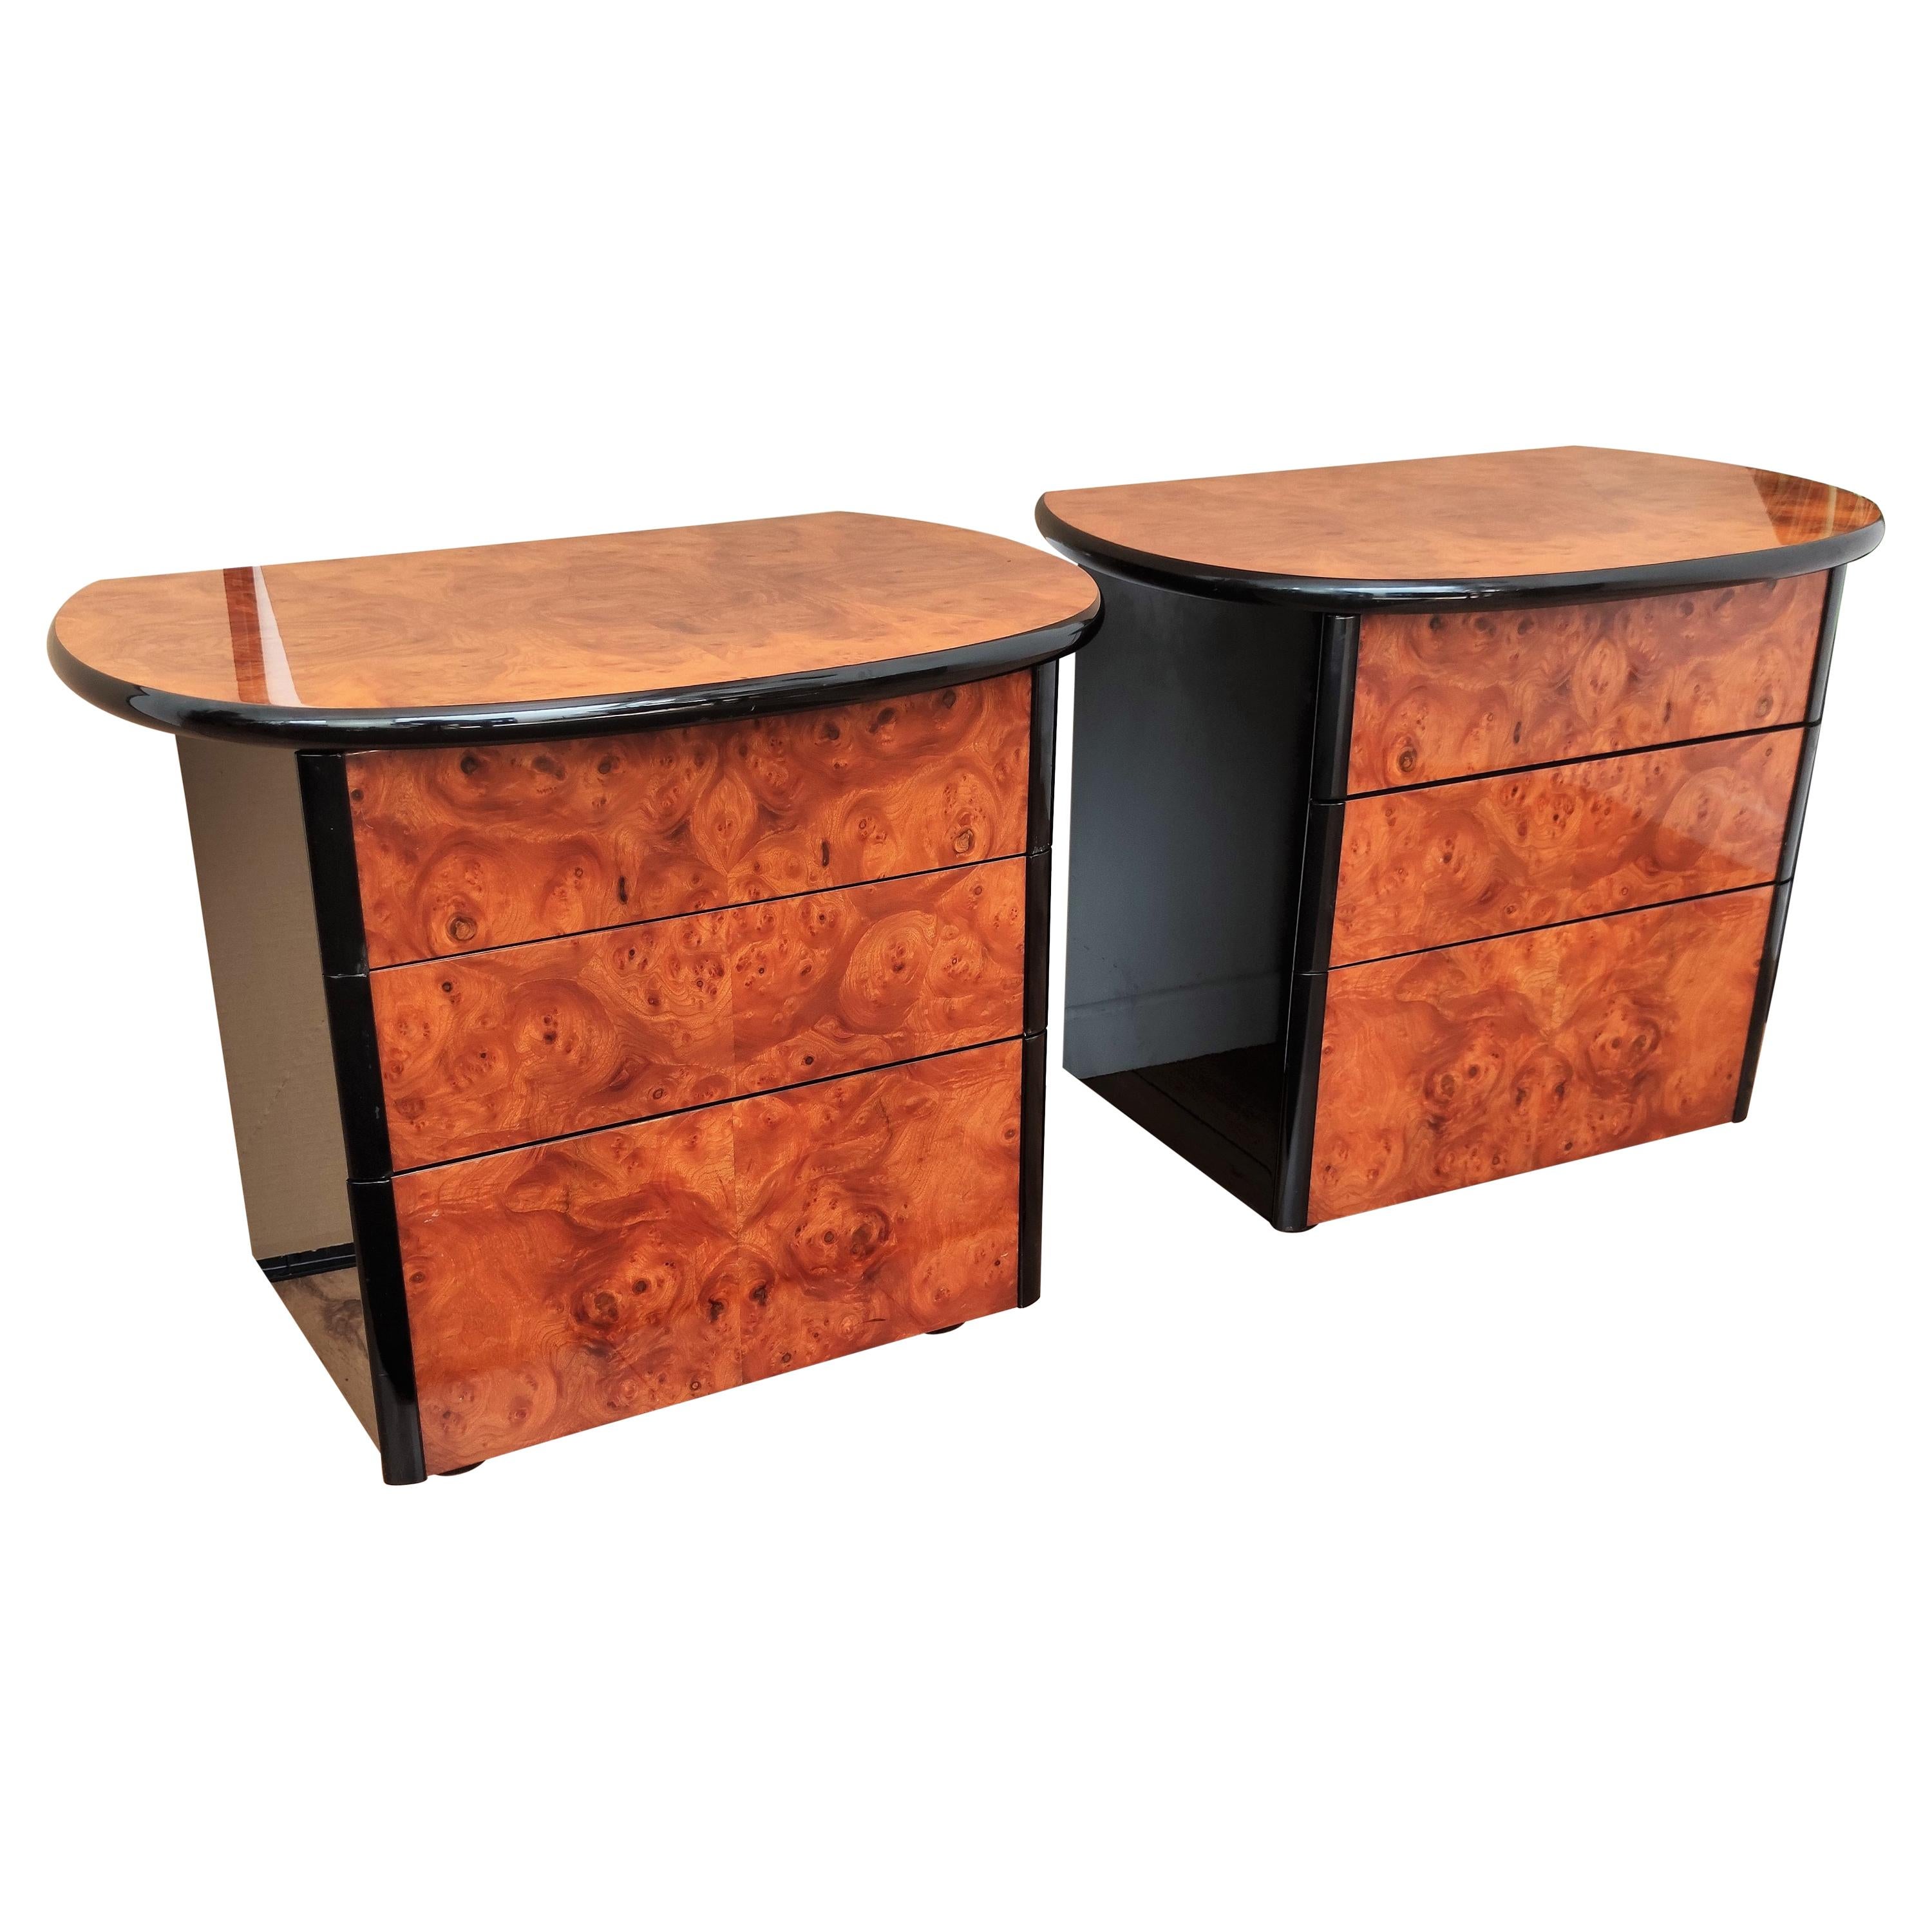 Pair of Art Deco Style Italian Walnut Burl and Lacquered Black Nightstands